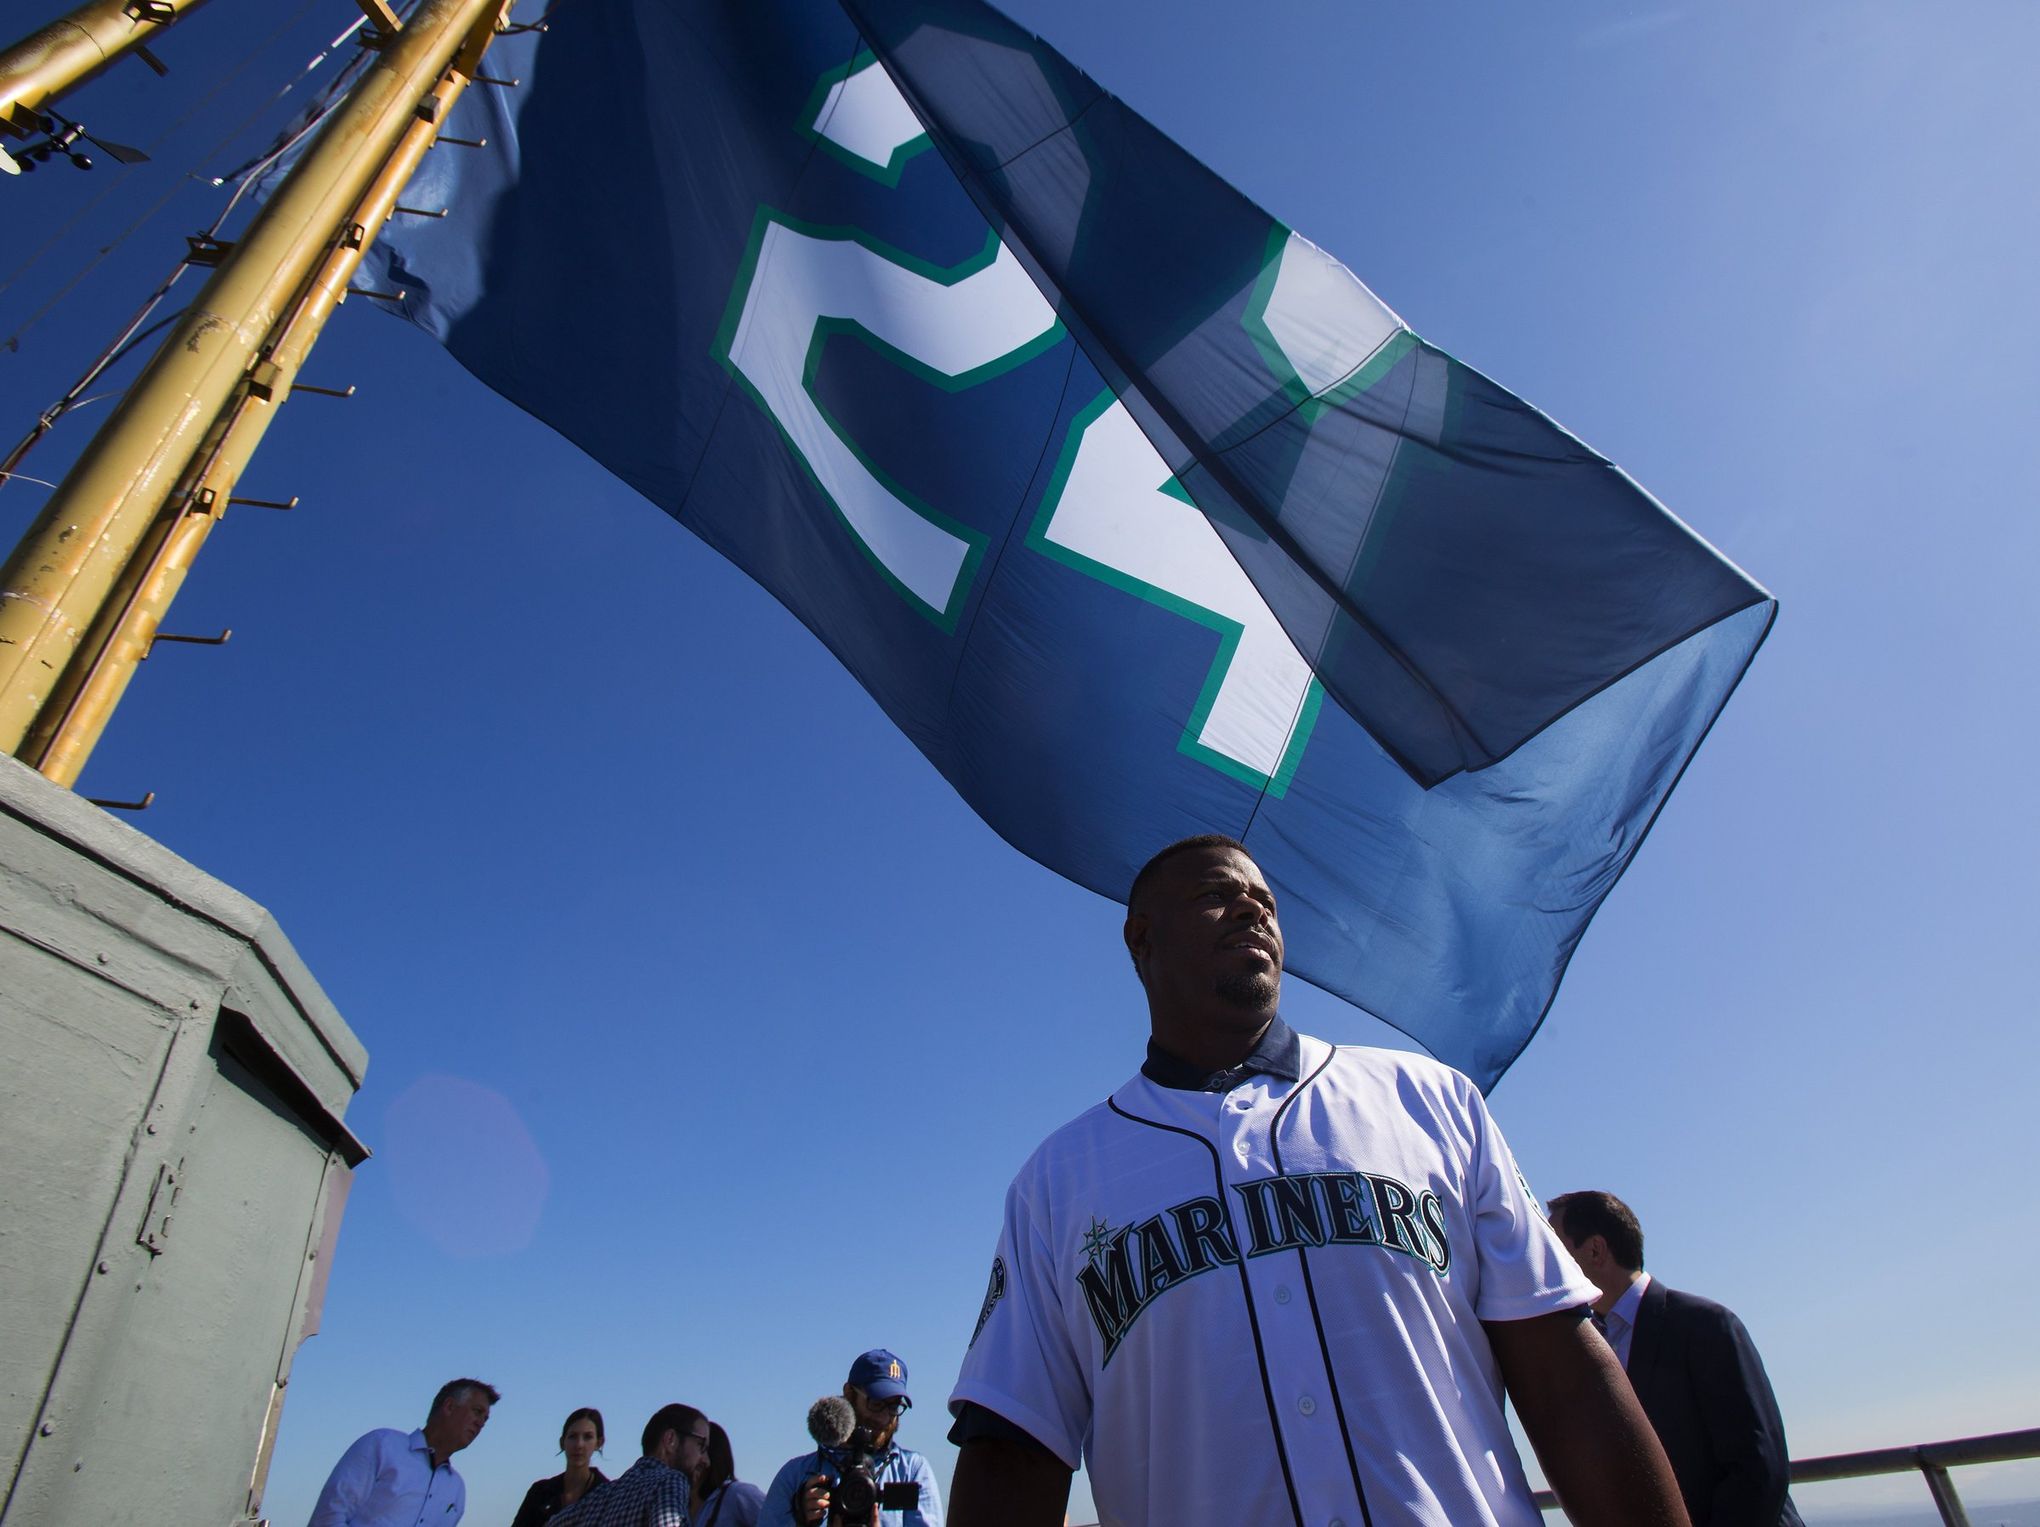 Ken Griffey Jr. weekend with the Mariners: What you need to know